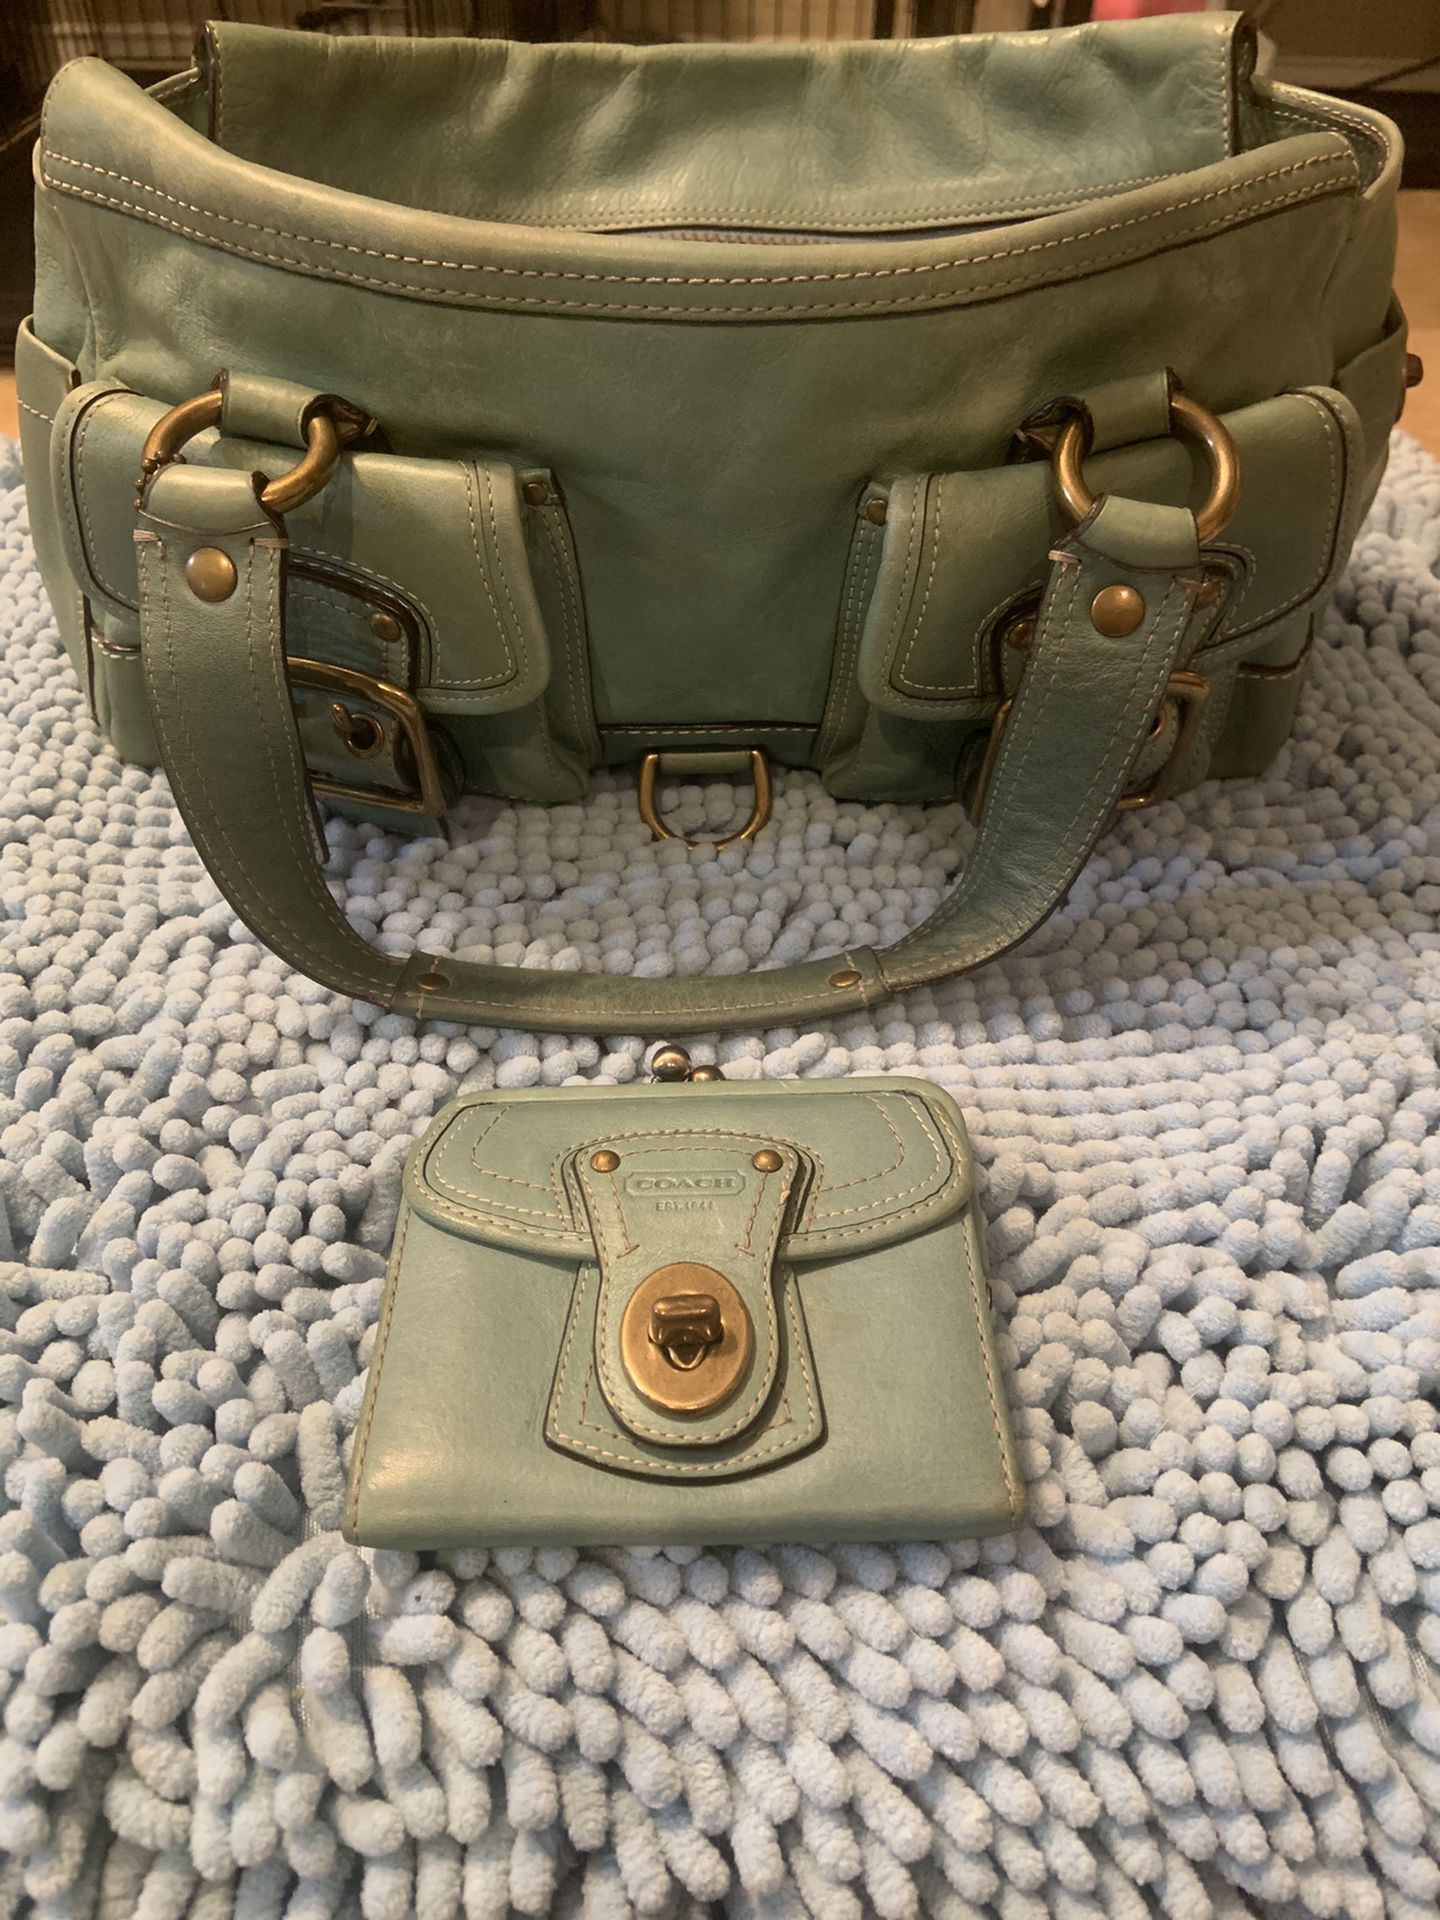 COACH 65TH ANNIVERSARY ICONIC TIFFANY BLUE LEGACY SATCHEL BAG #10330 AND MATCHING WALLET